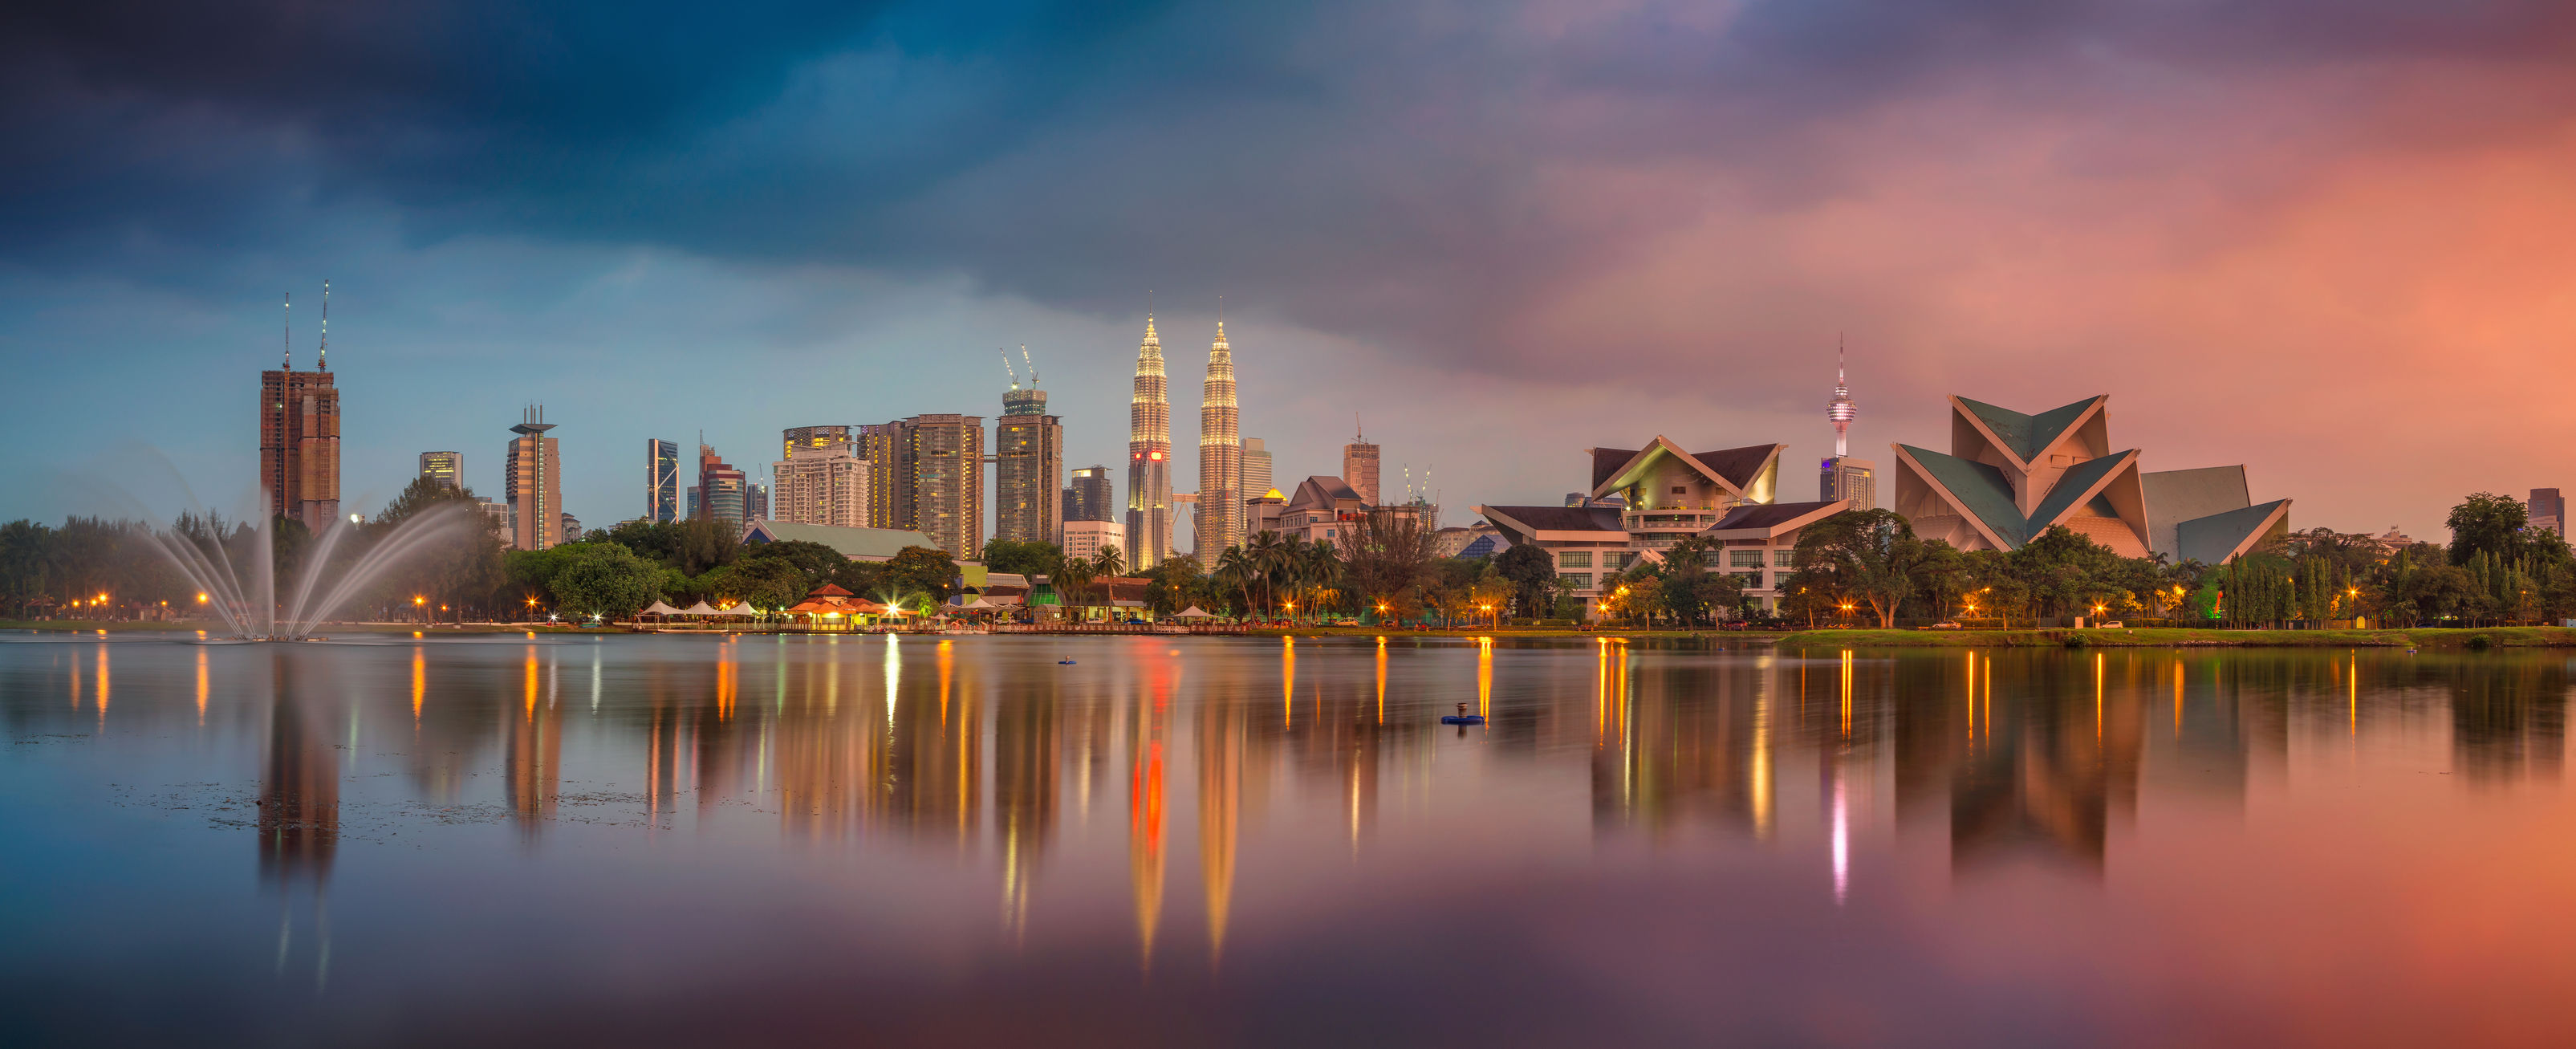 Malaysia’s Climate Change Act? What To Expect.